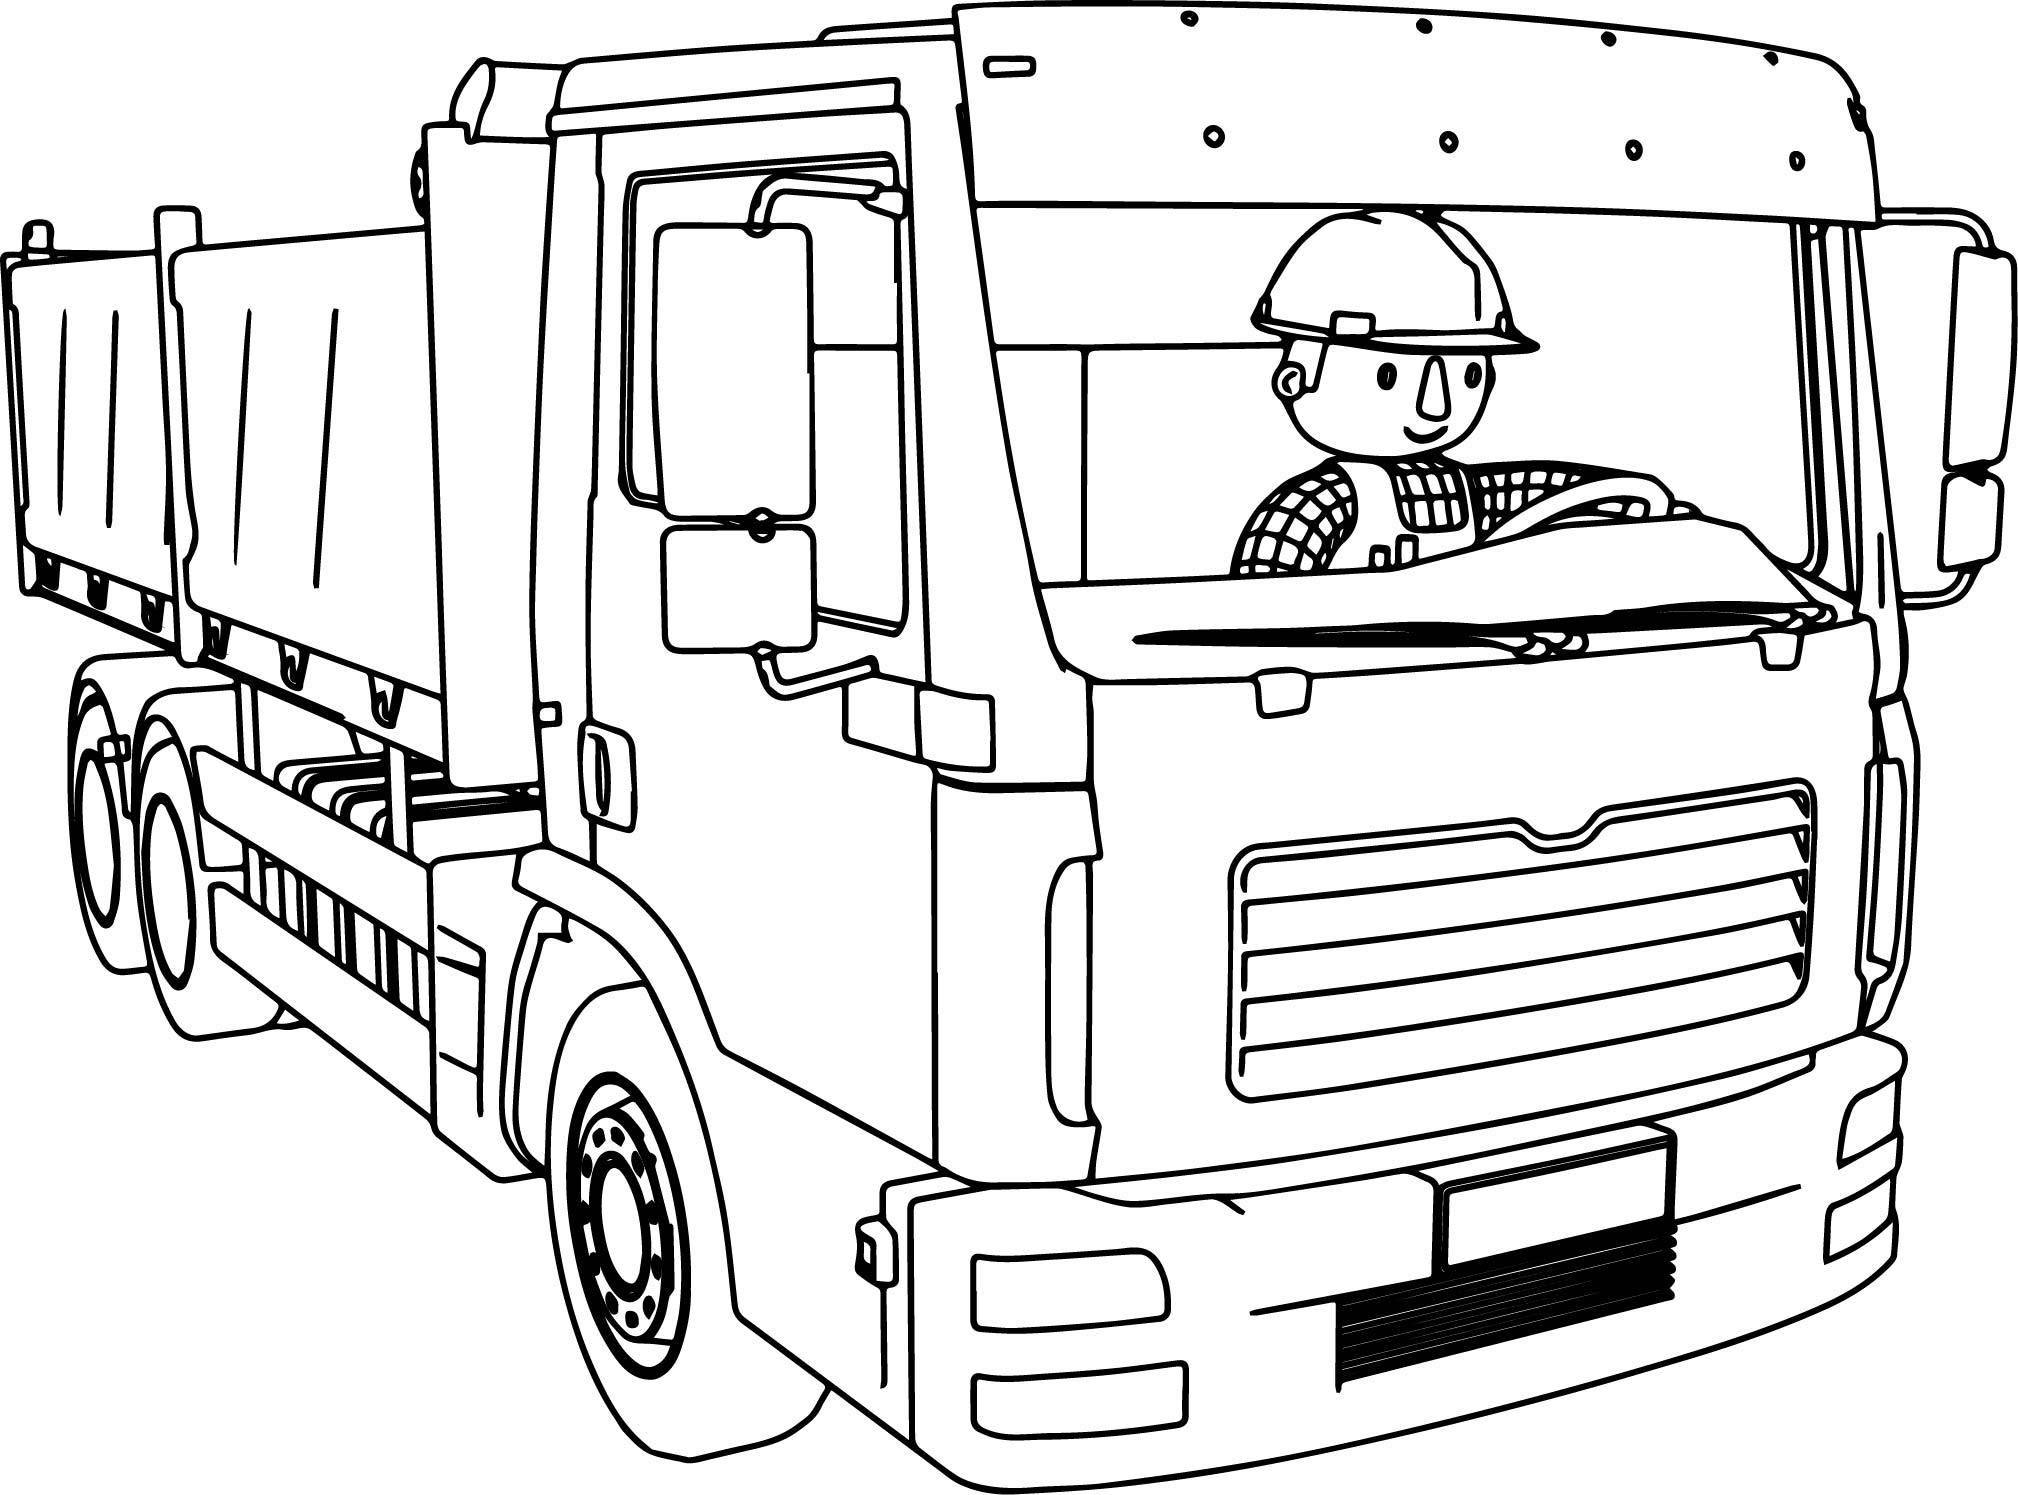 Police Truck Coloring Pages at GetColorings.com | Free printable